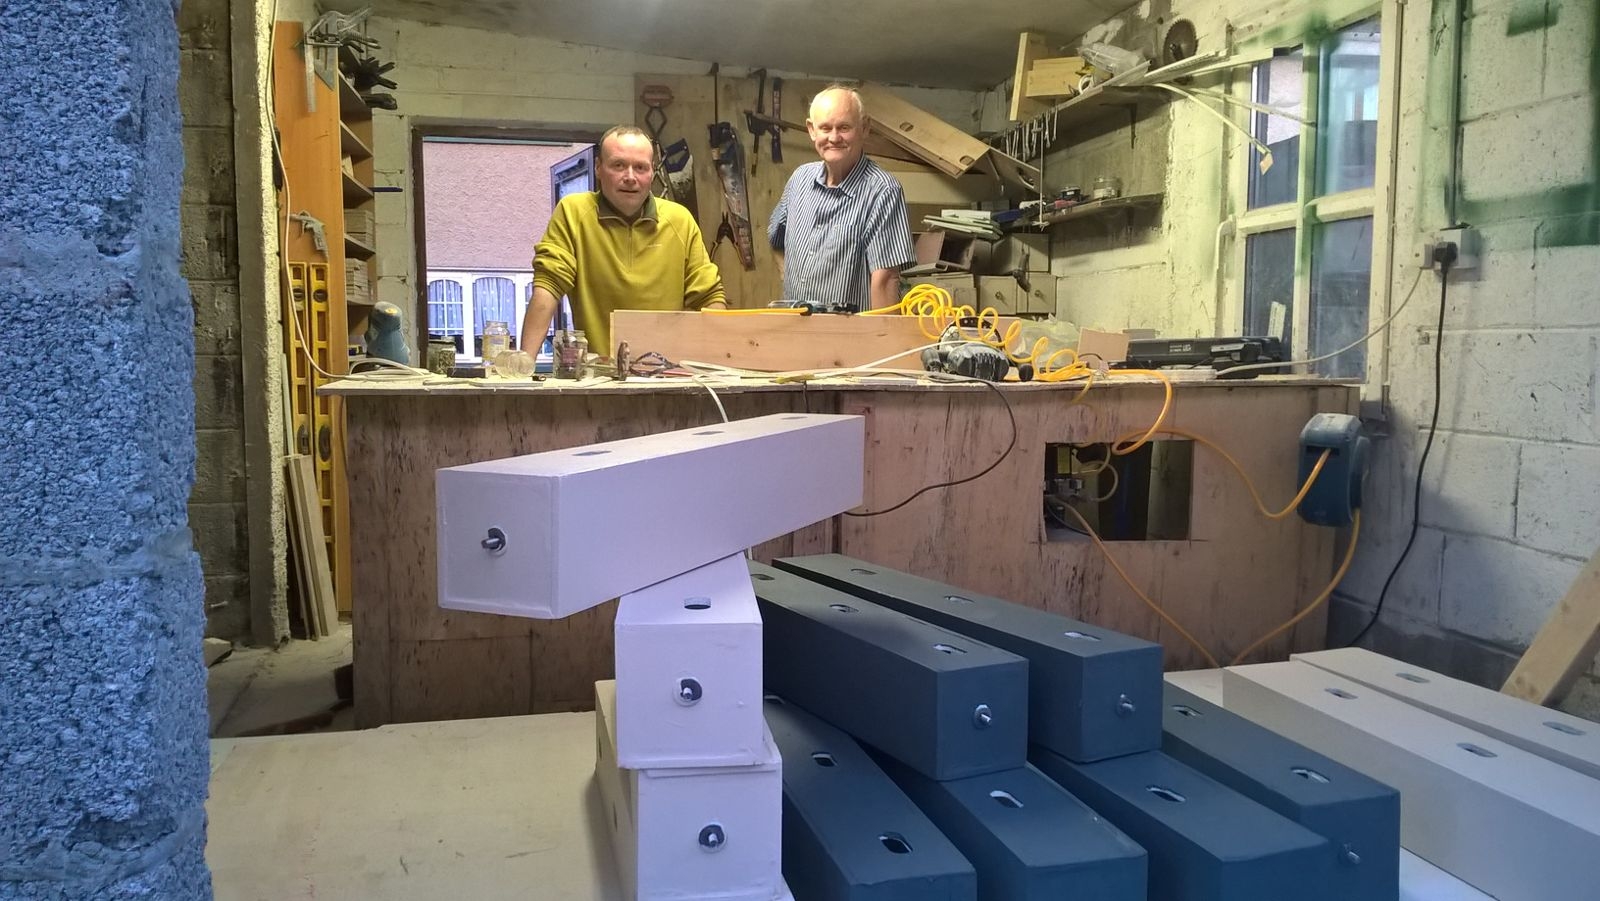 Stephan de Beer in his Workshop with Paddy Sheridan form Wild Kildare